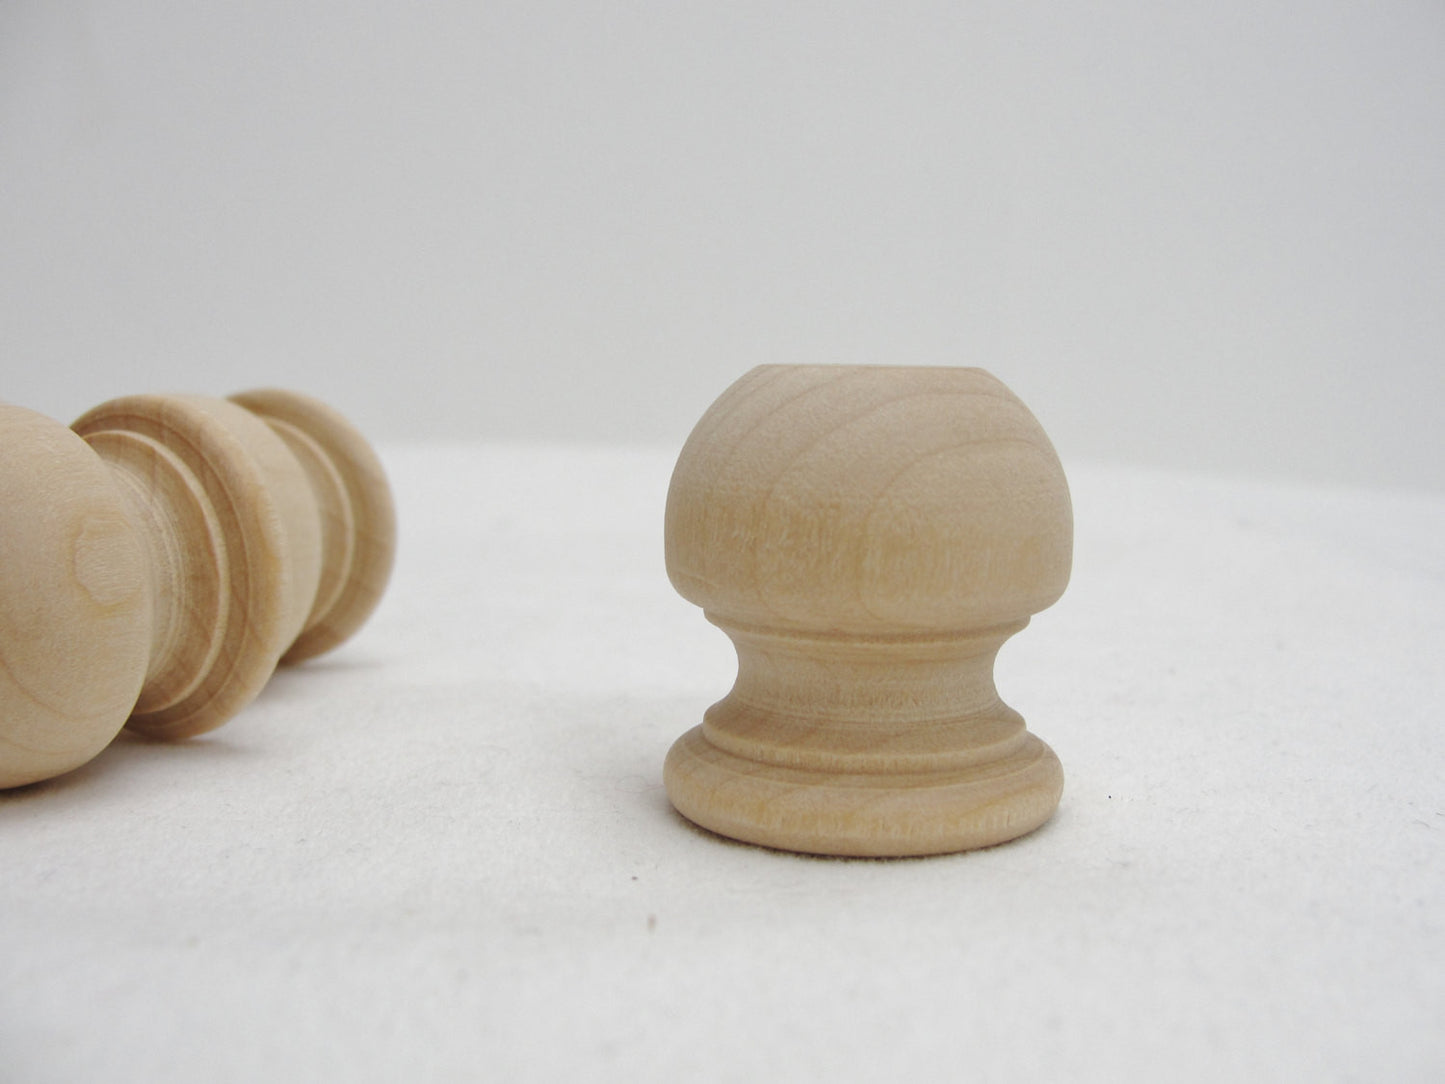 Wooden end cap Finial 1 1/16" tall, 1" wide set of 12 - Wood parts - Craft Supply House